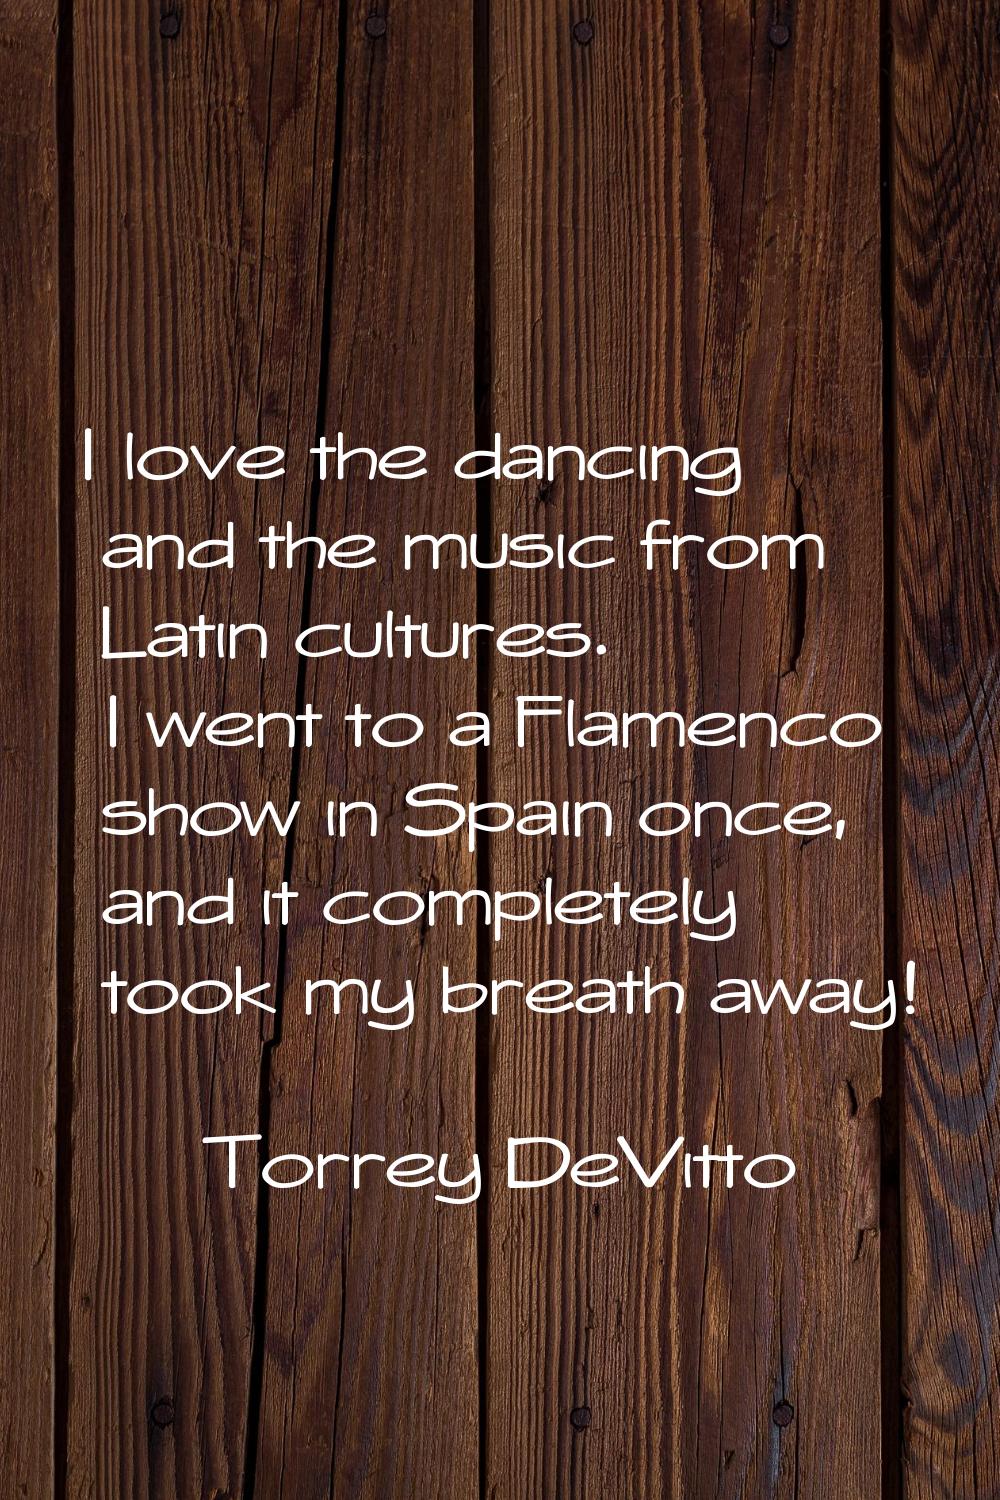 I love the dancing and the music from Latin cultures. I went to a Flamenco show in Spain once, and 